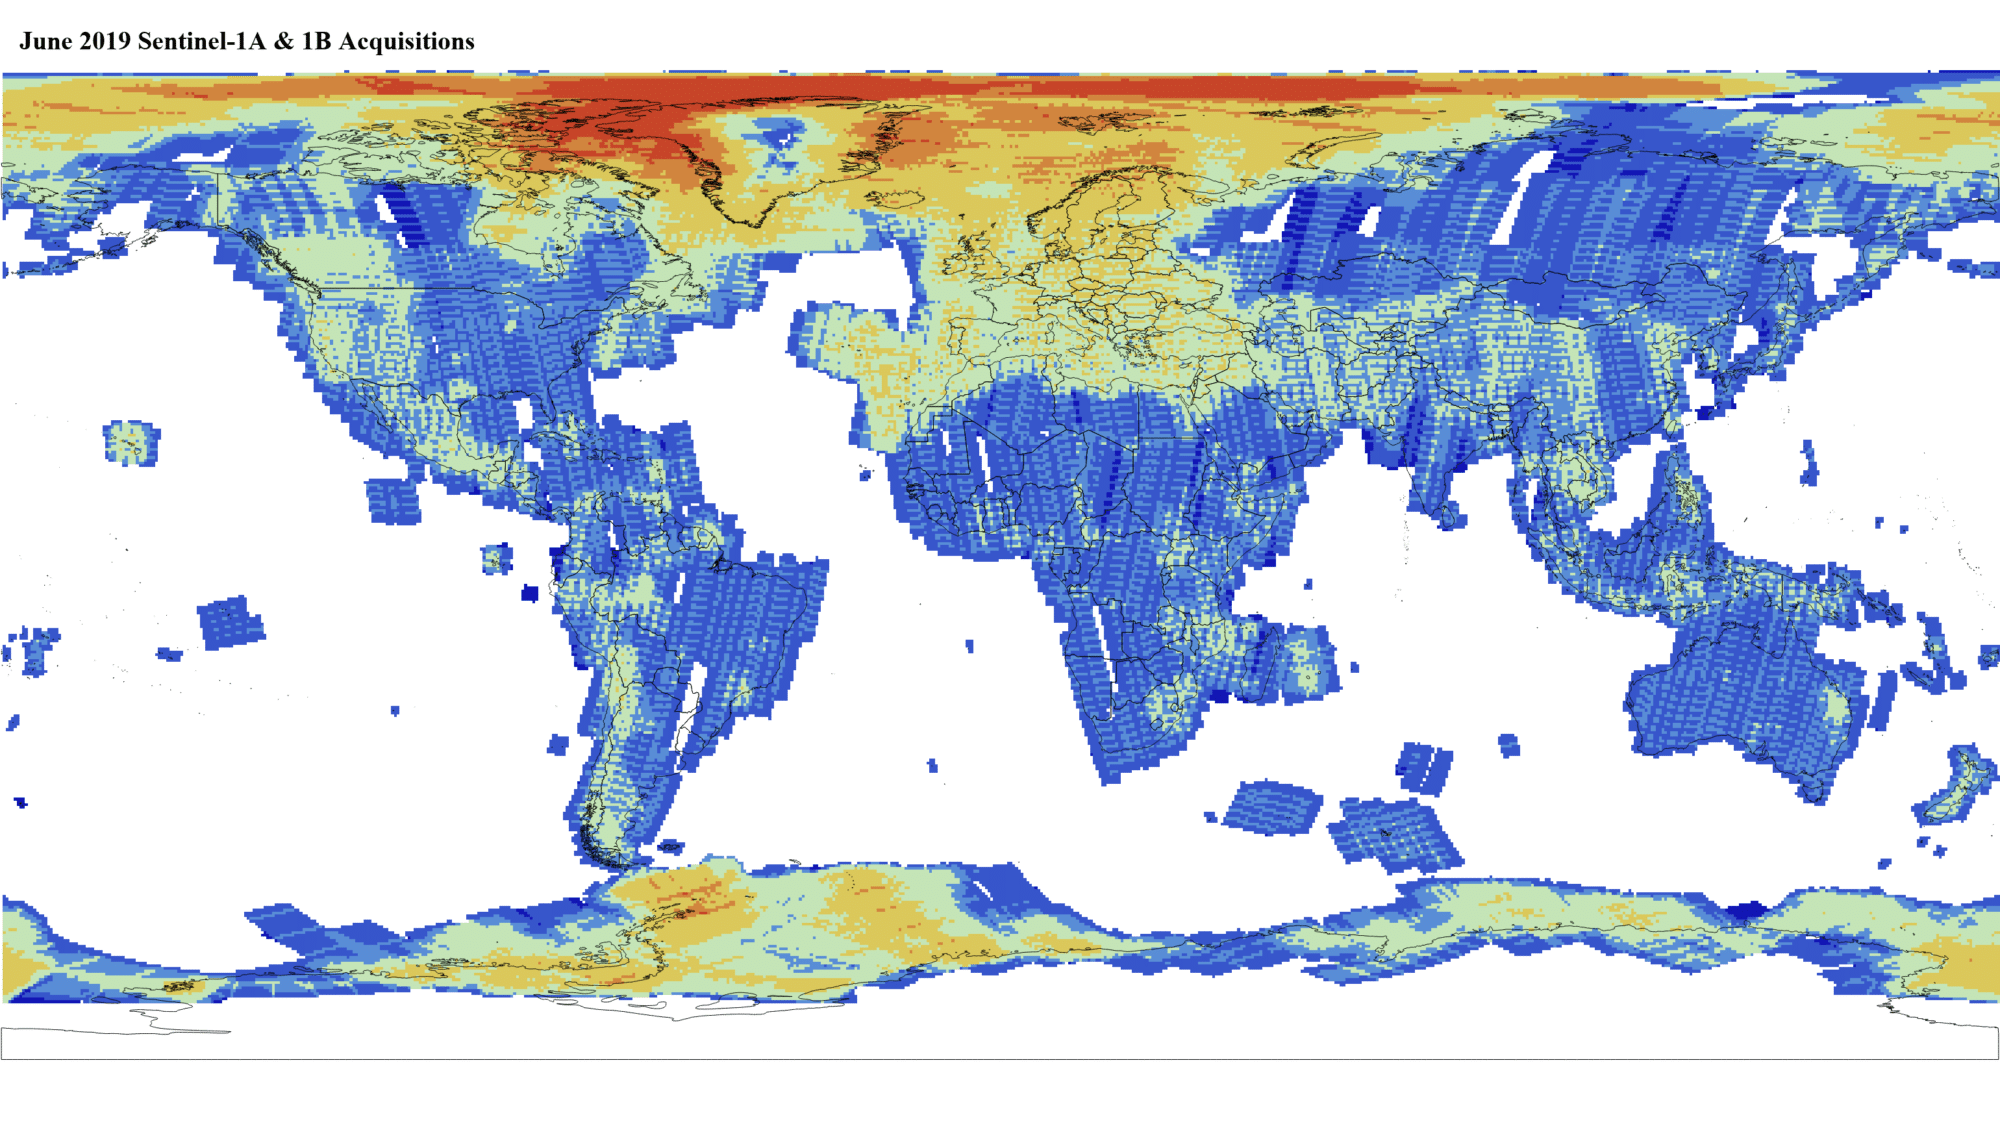 Heat map of Sentinel-1A and -1B GRD global acquisitions June 2019